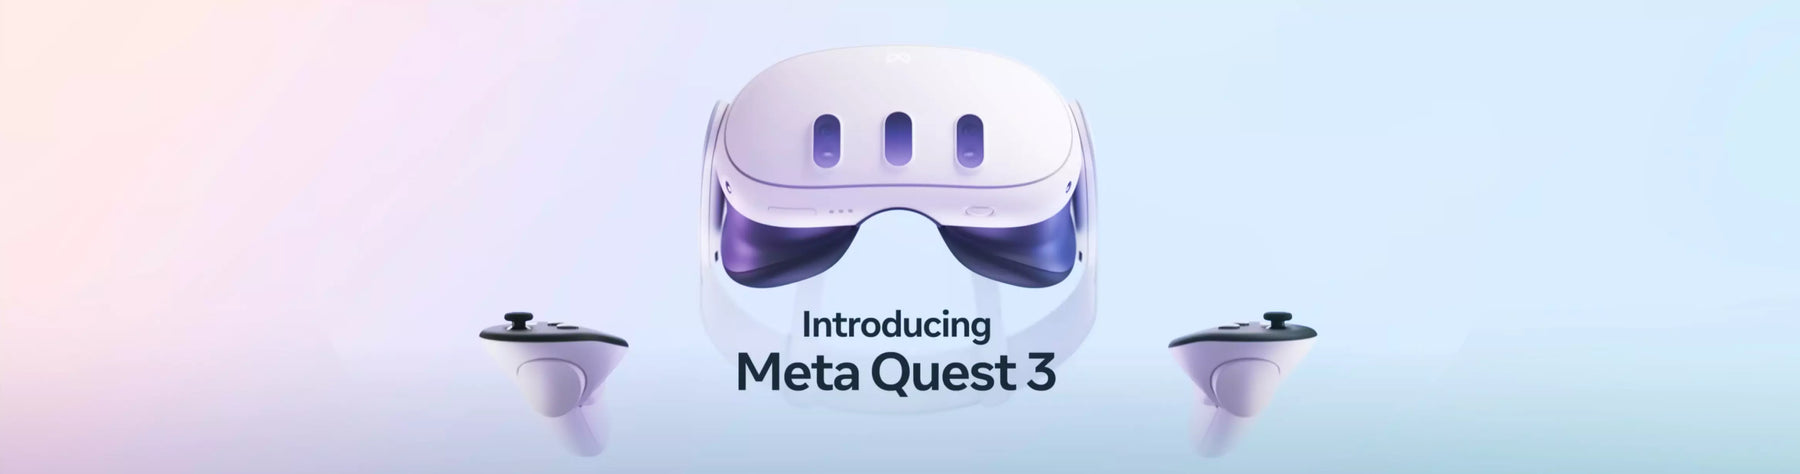 Quest 3: A Leap Forward in Mixed Reality - Are You Ready?